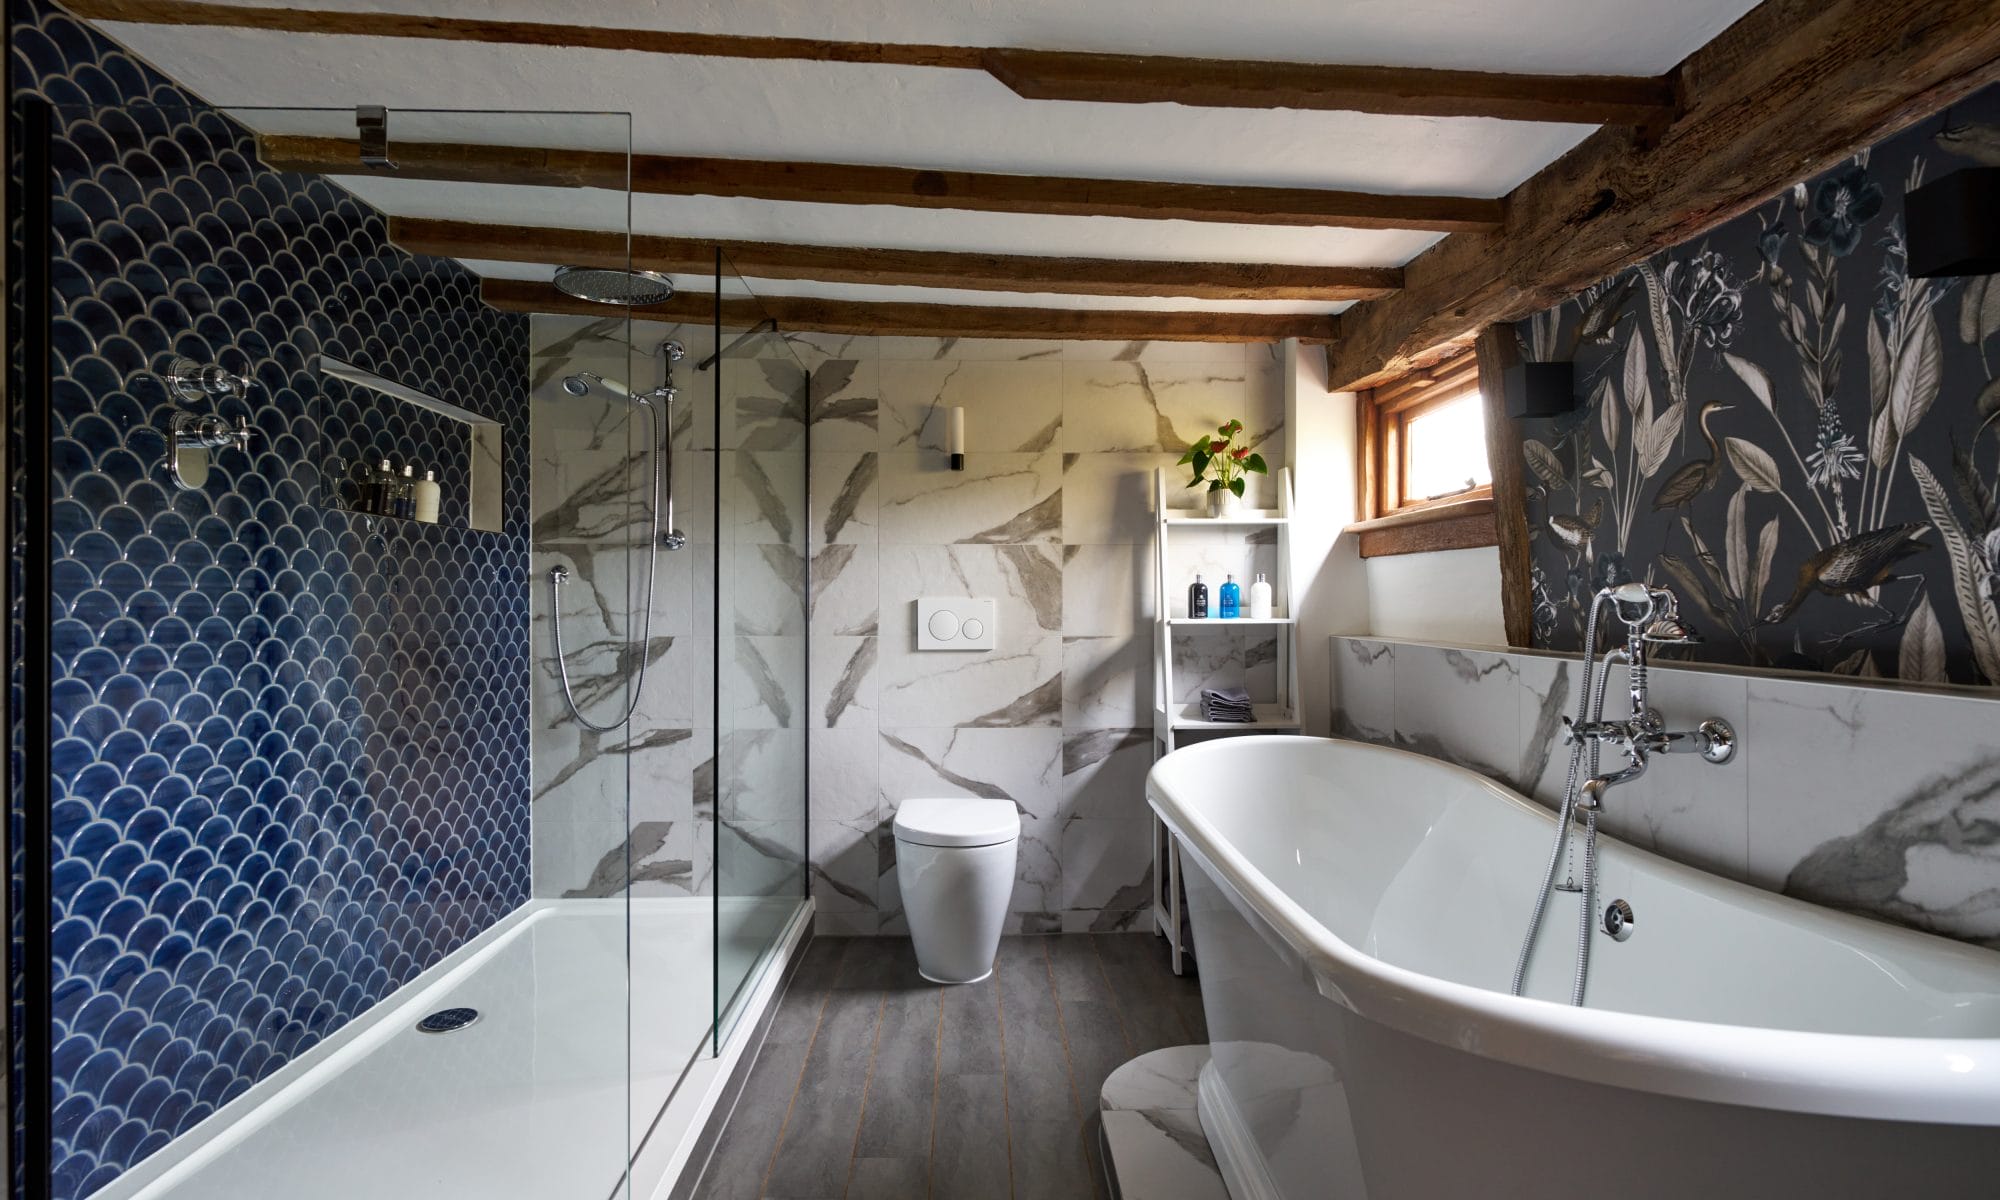 Freestanding boat bath with fish scale tiles